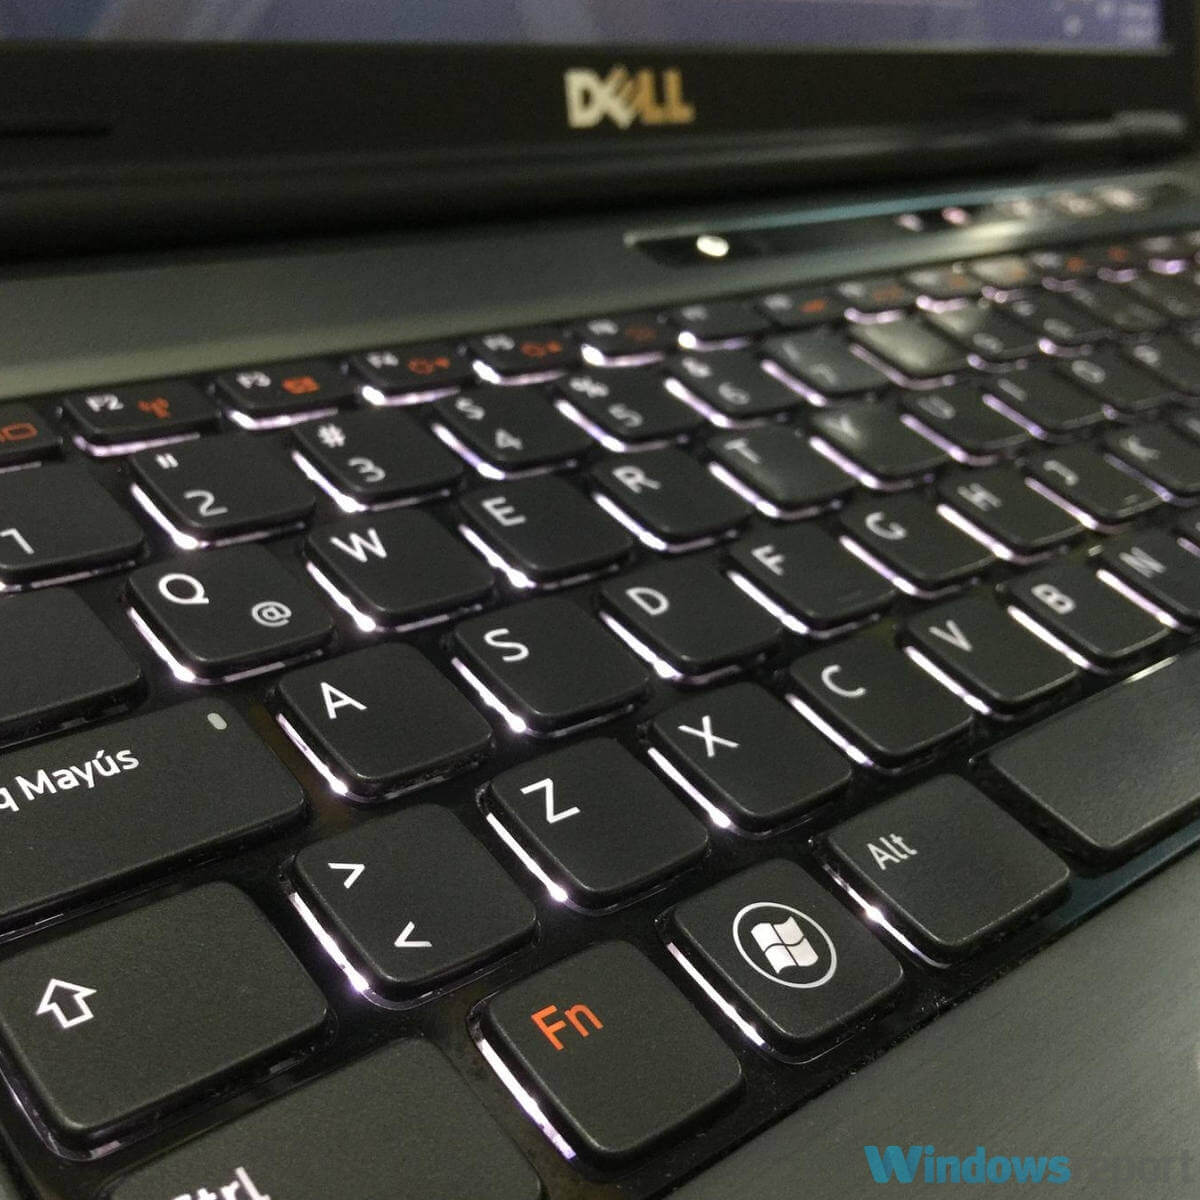 laptop keyboard close-up -Windows server how to add user 